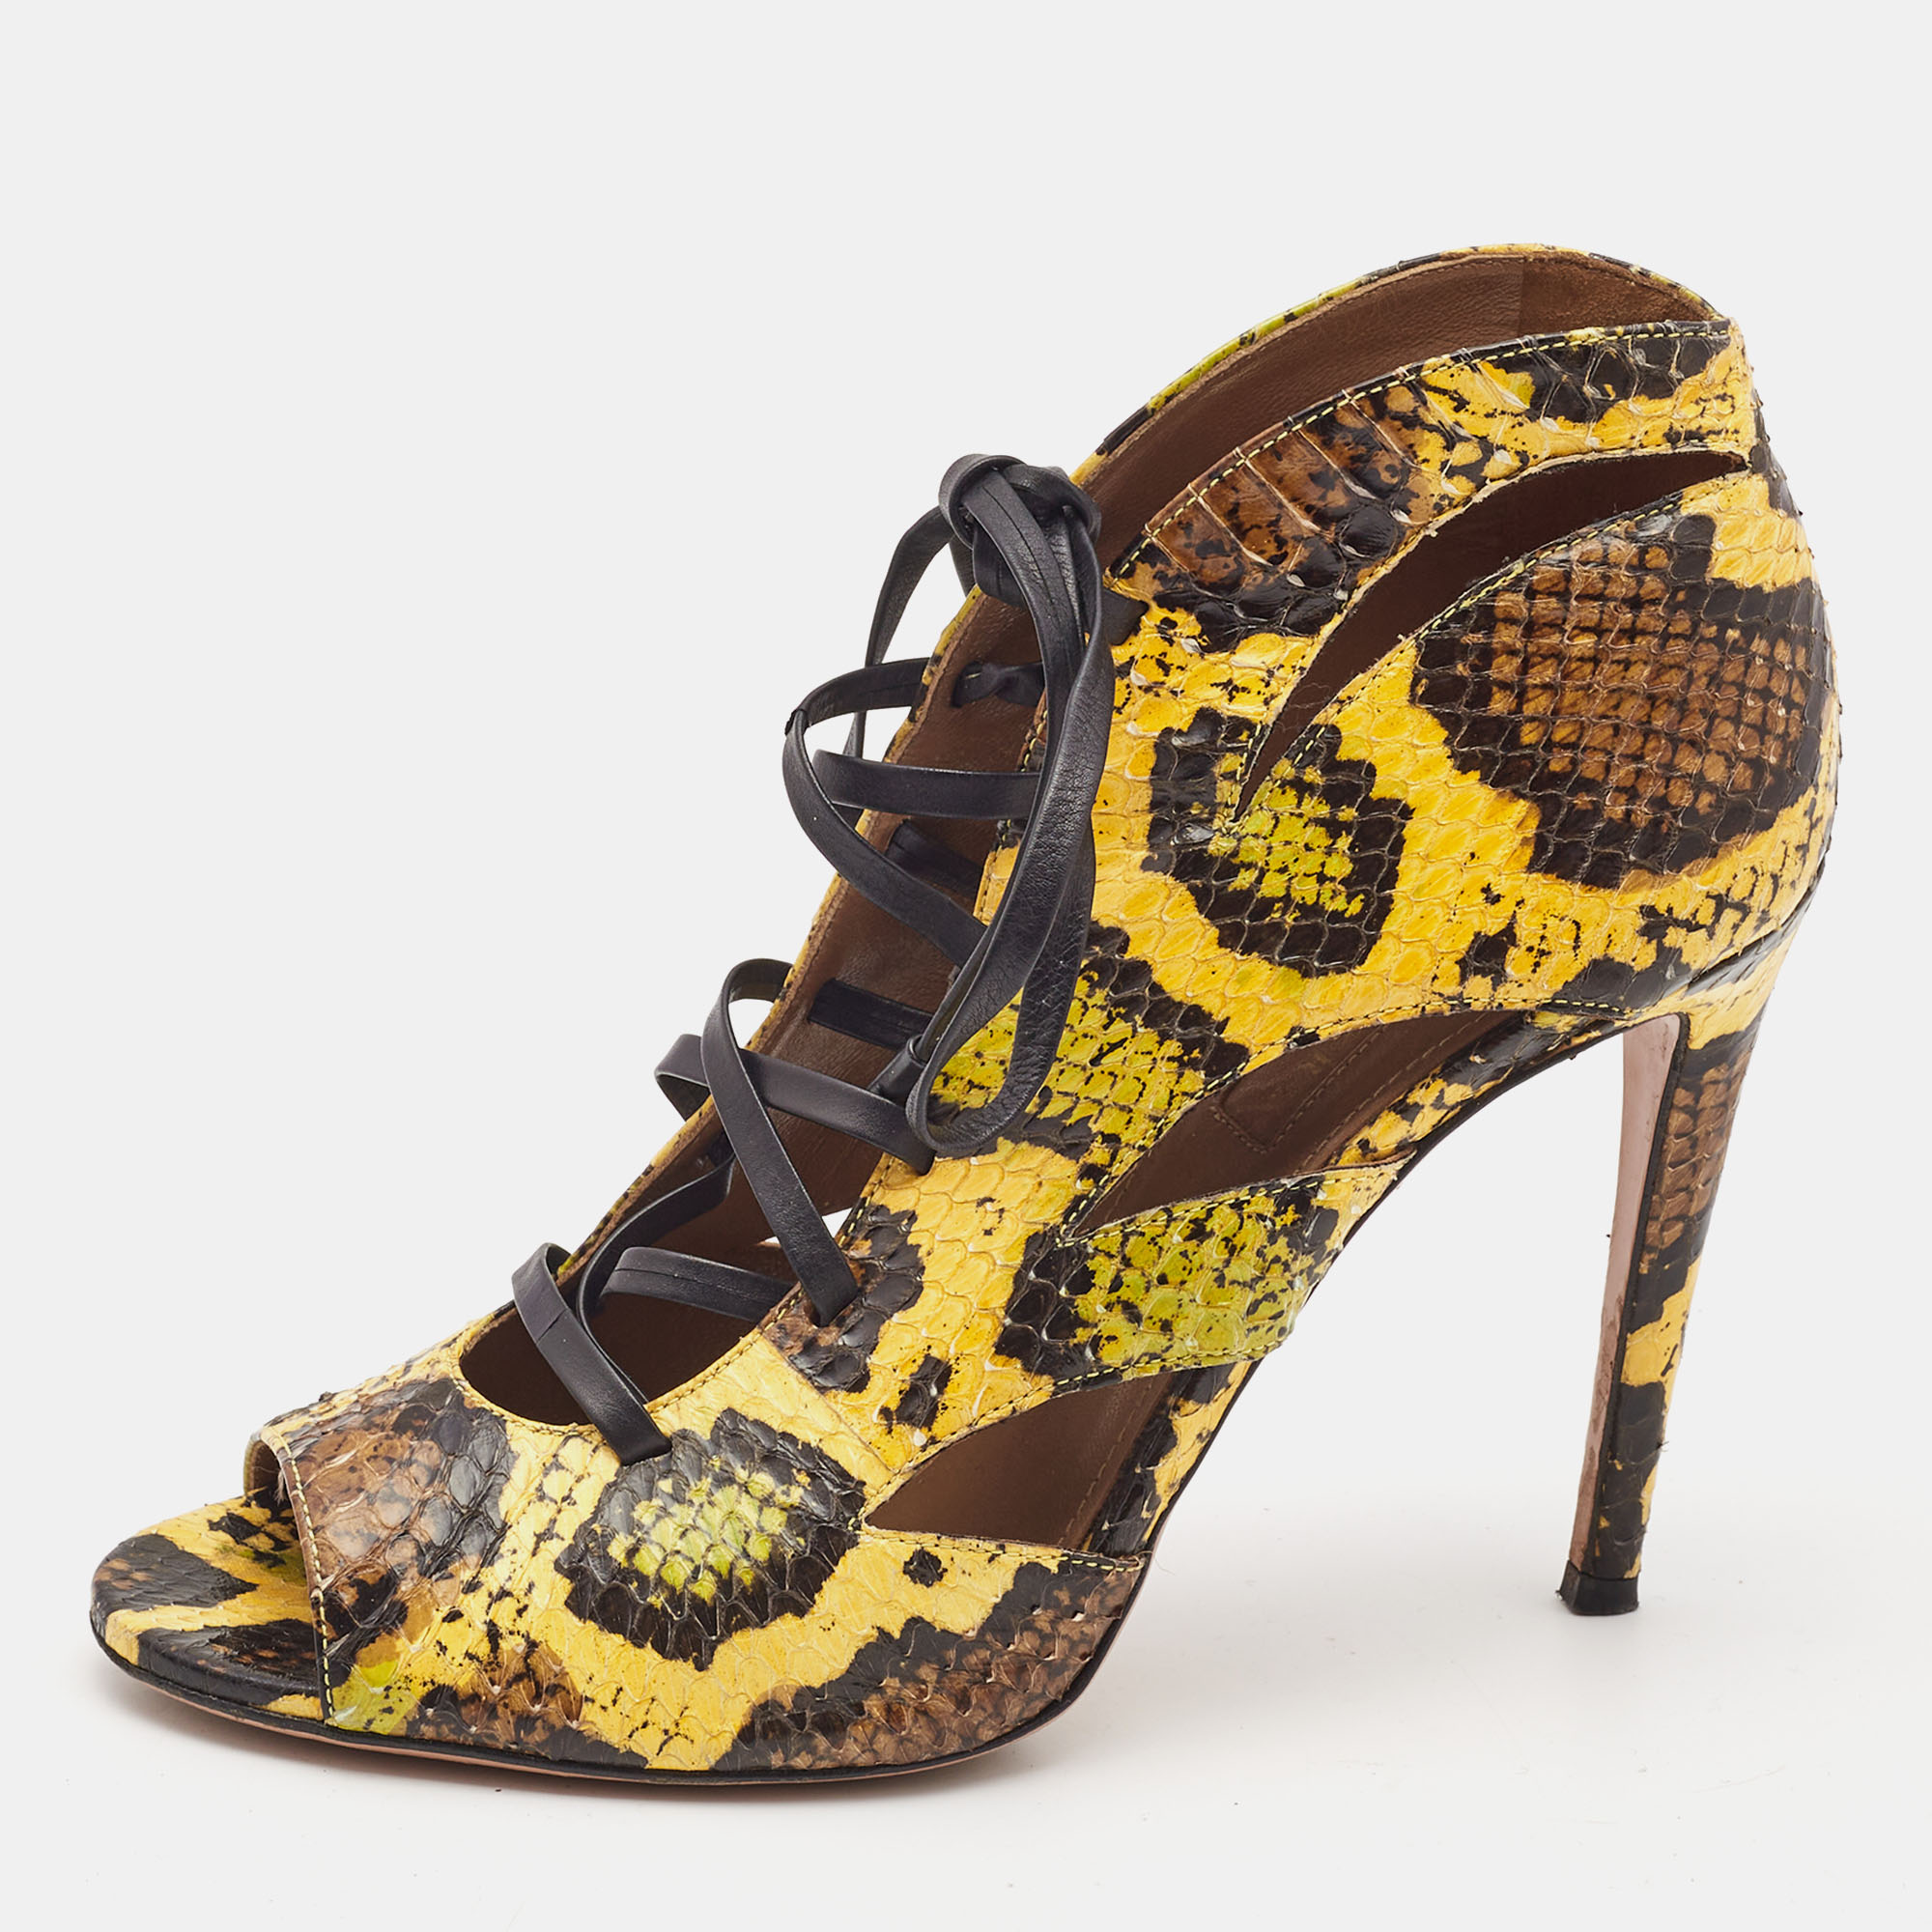 Pre-owned Aquazzura Yellow Python Open Toe Lace Up Booties Size 38